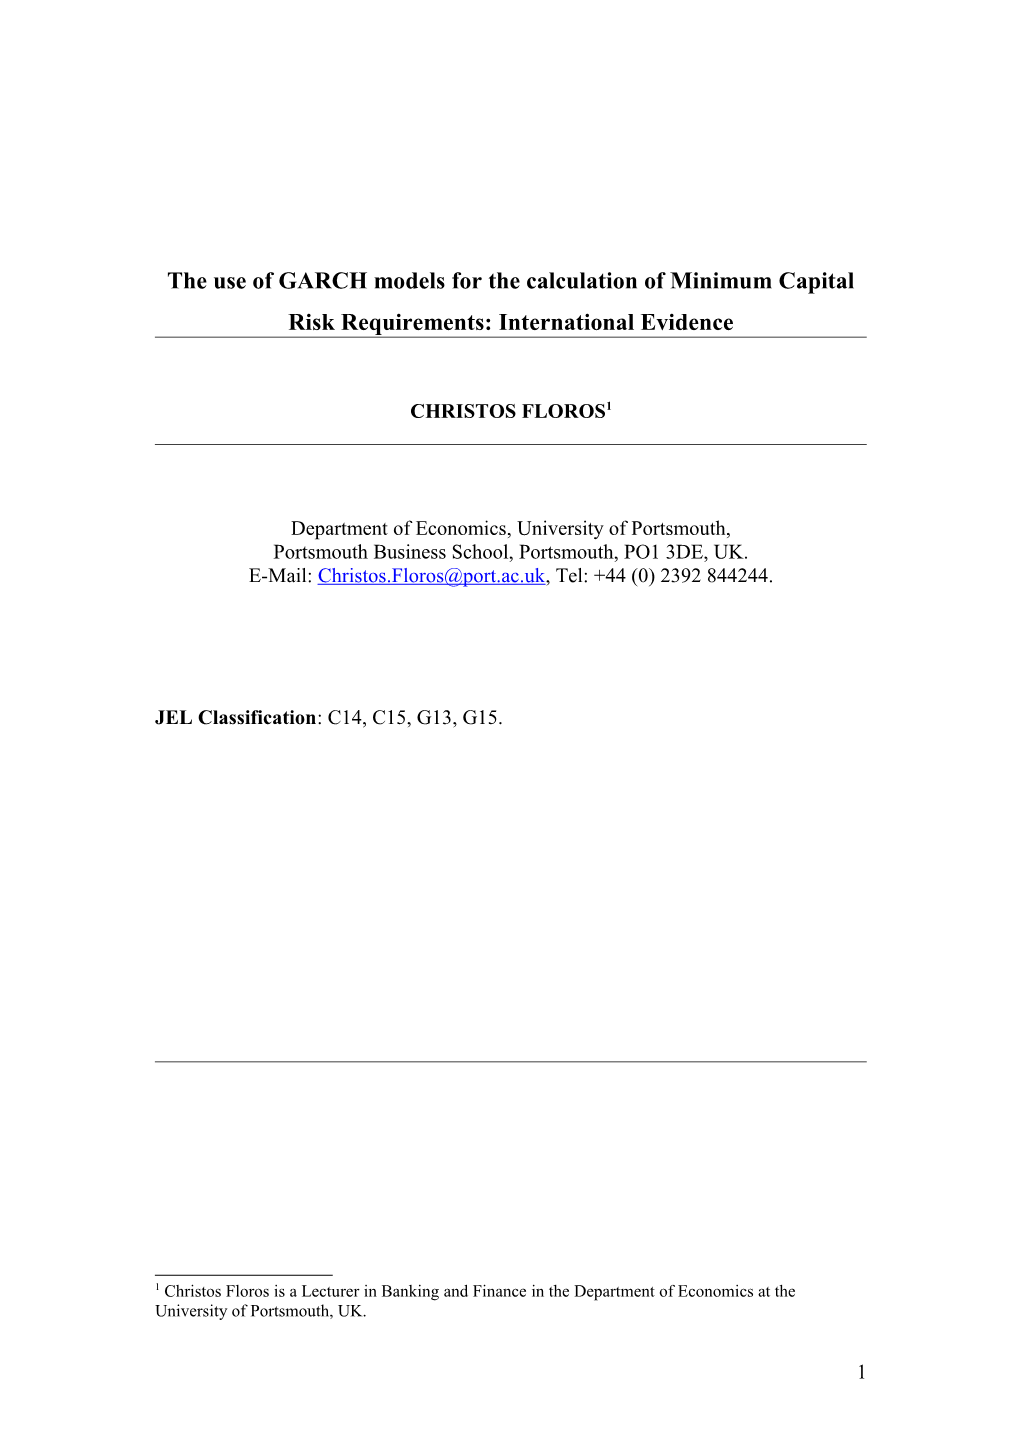 The Use of GARCH Models for the Calculation of Minimum Capital Risk Requirements: International